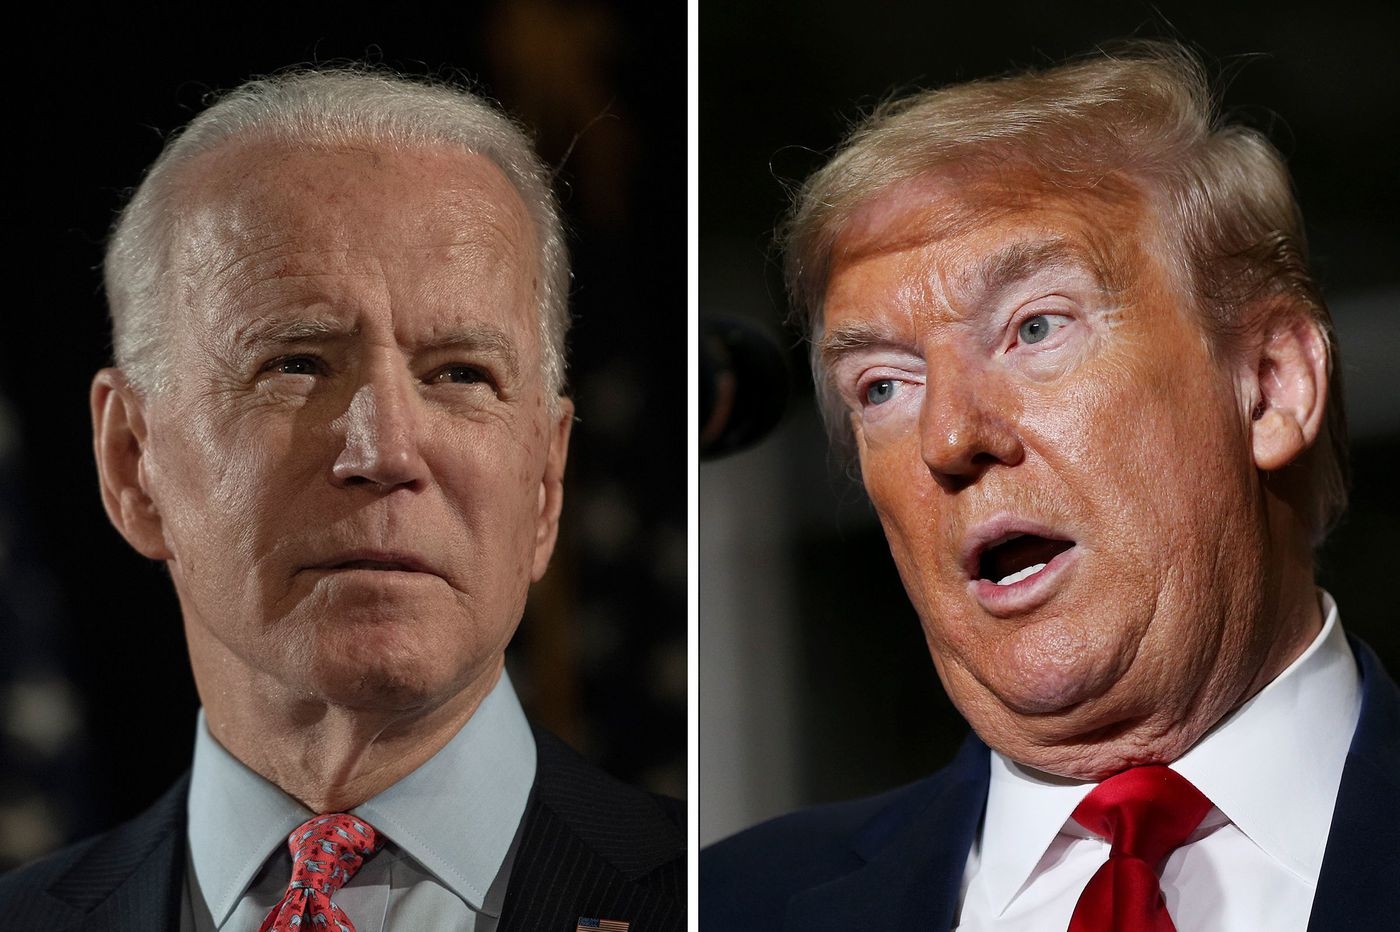 Here’s what to know about the Joe Biden, Donald Trump competing town halls tonight